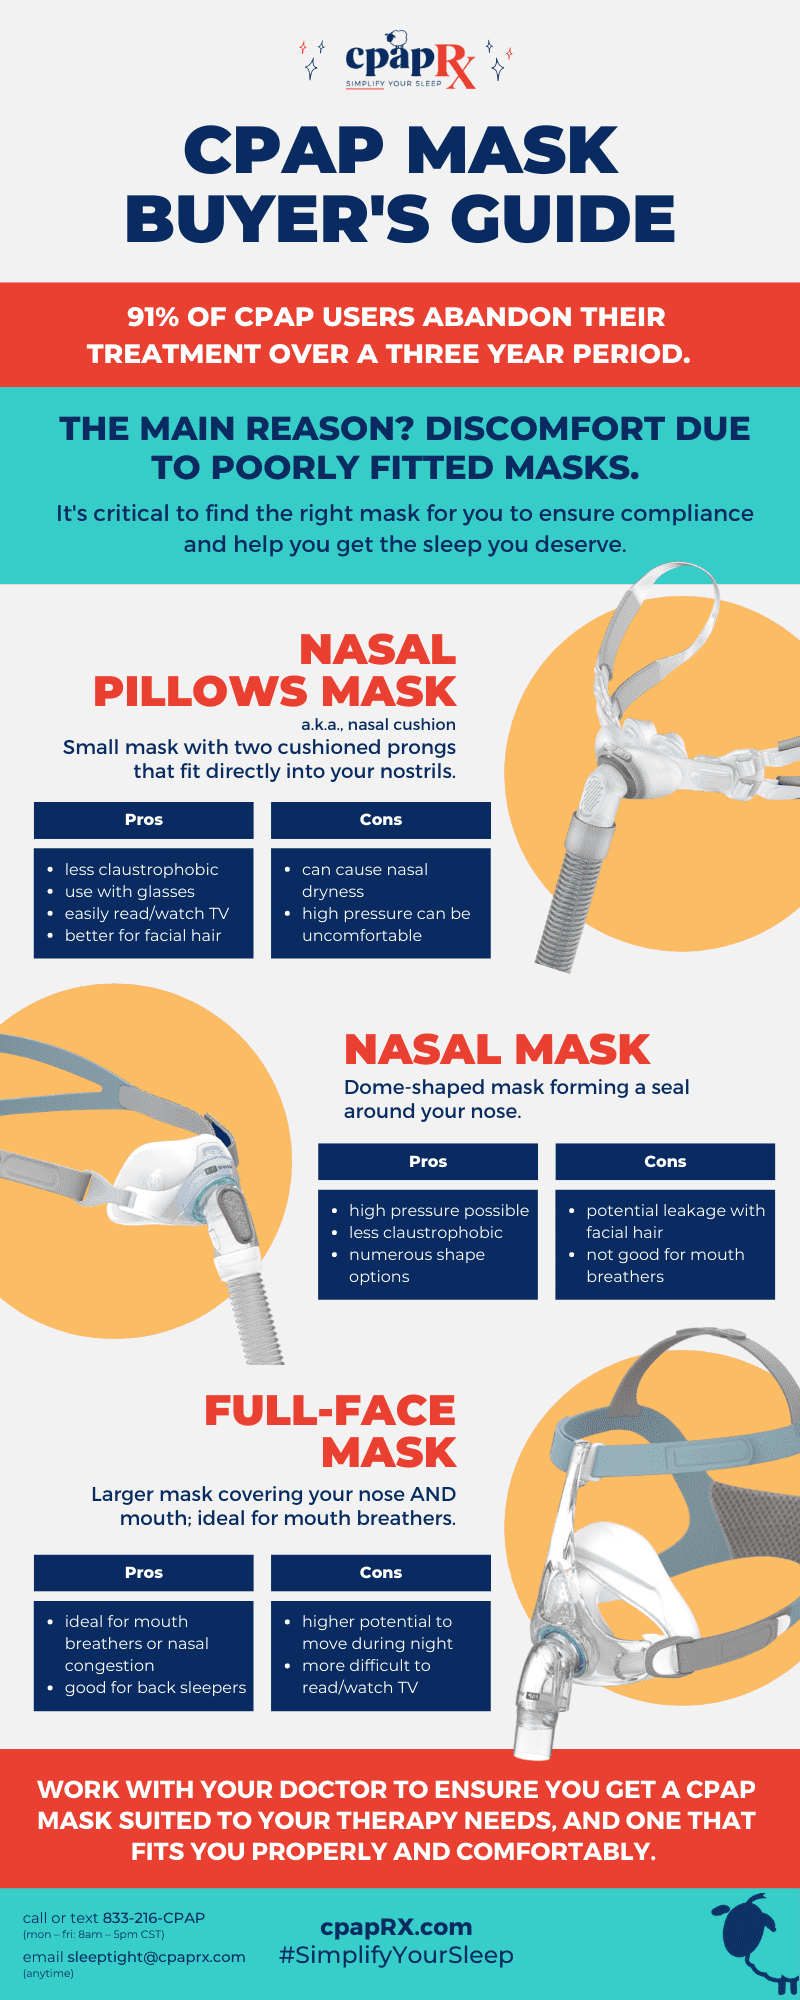 CPAP Mask Buyer's Guide - cpapRX